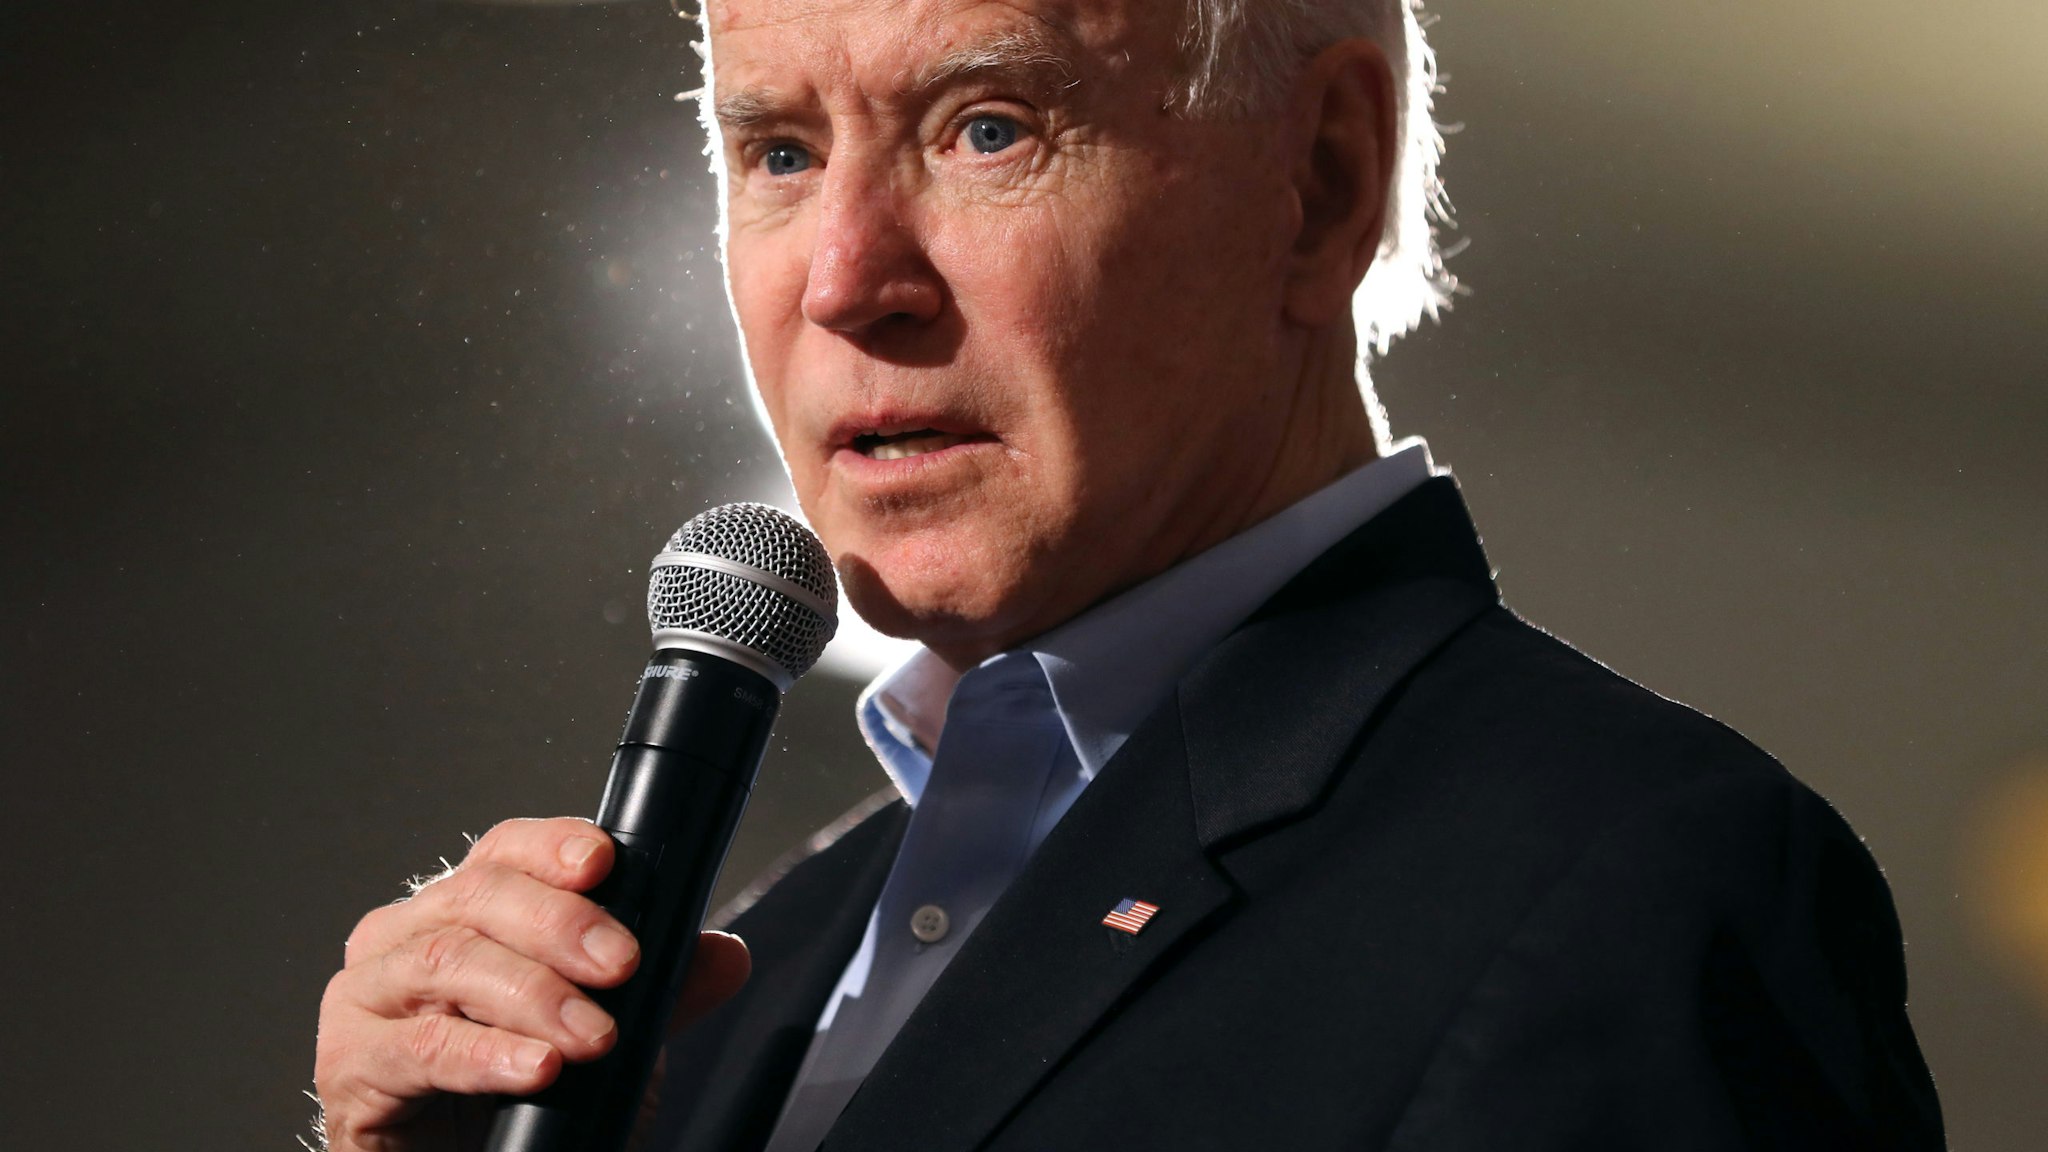 MARION, IOWA - JANUARY 27: Democratic presidential candidate former Vice President Joe Biden speaks during a campaign event at the Prairie Hill Pavilion January 27, 2020 in Marion, Iowa. In a what appears to be a neck-and-neck race, Biden is ahead of rival candidate Sen. Bernie Sanders (I-VT) by 6 points in a USA Today/Suffolk University poll but is running behind Sanders by 8 points according to a New York Times/Siena College poll, both polls of likely Iowa caucus-goers conducted at about the same time.